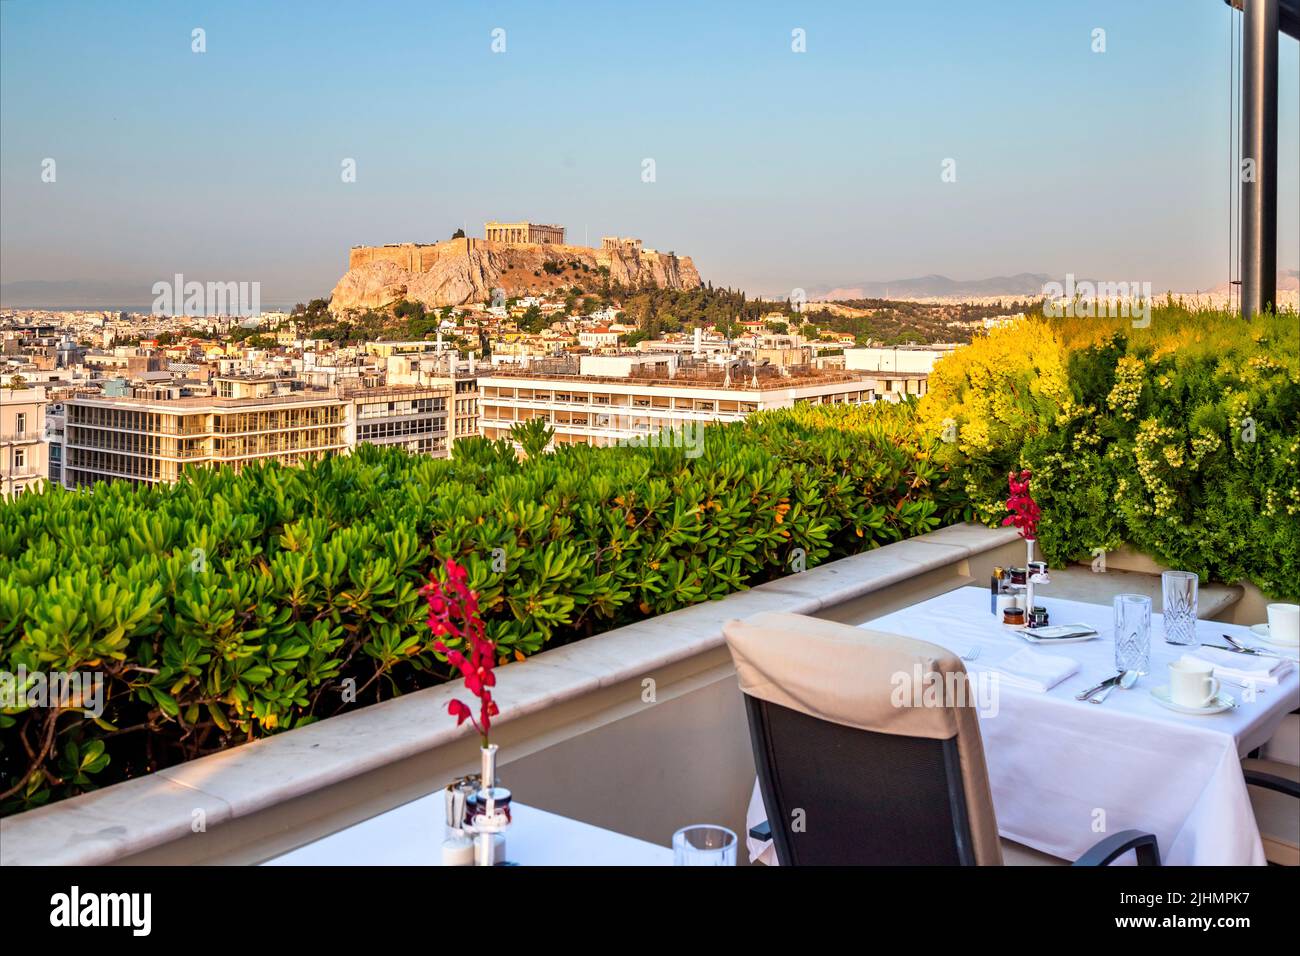 View of the Acropolis from the GB Roof Garden Restaurant & Bar, Athens Greece. Stock Photo